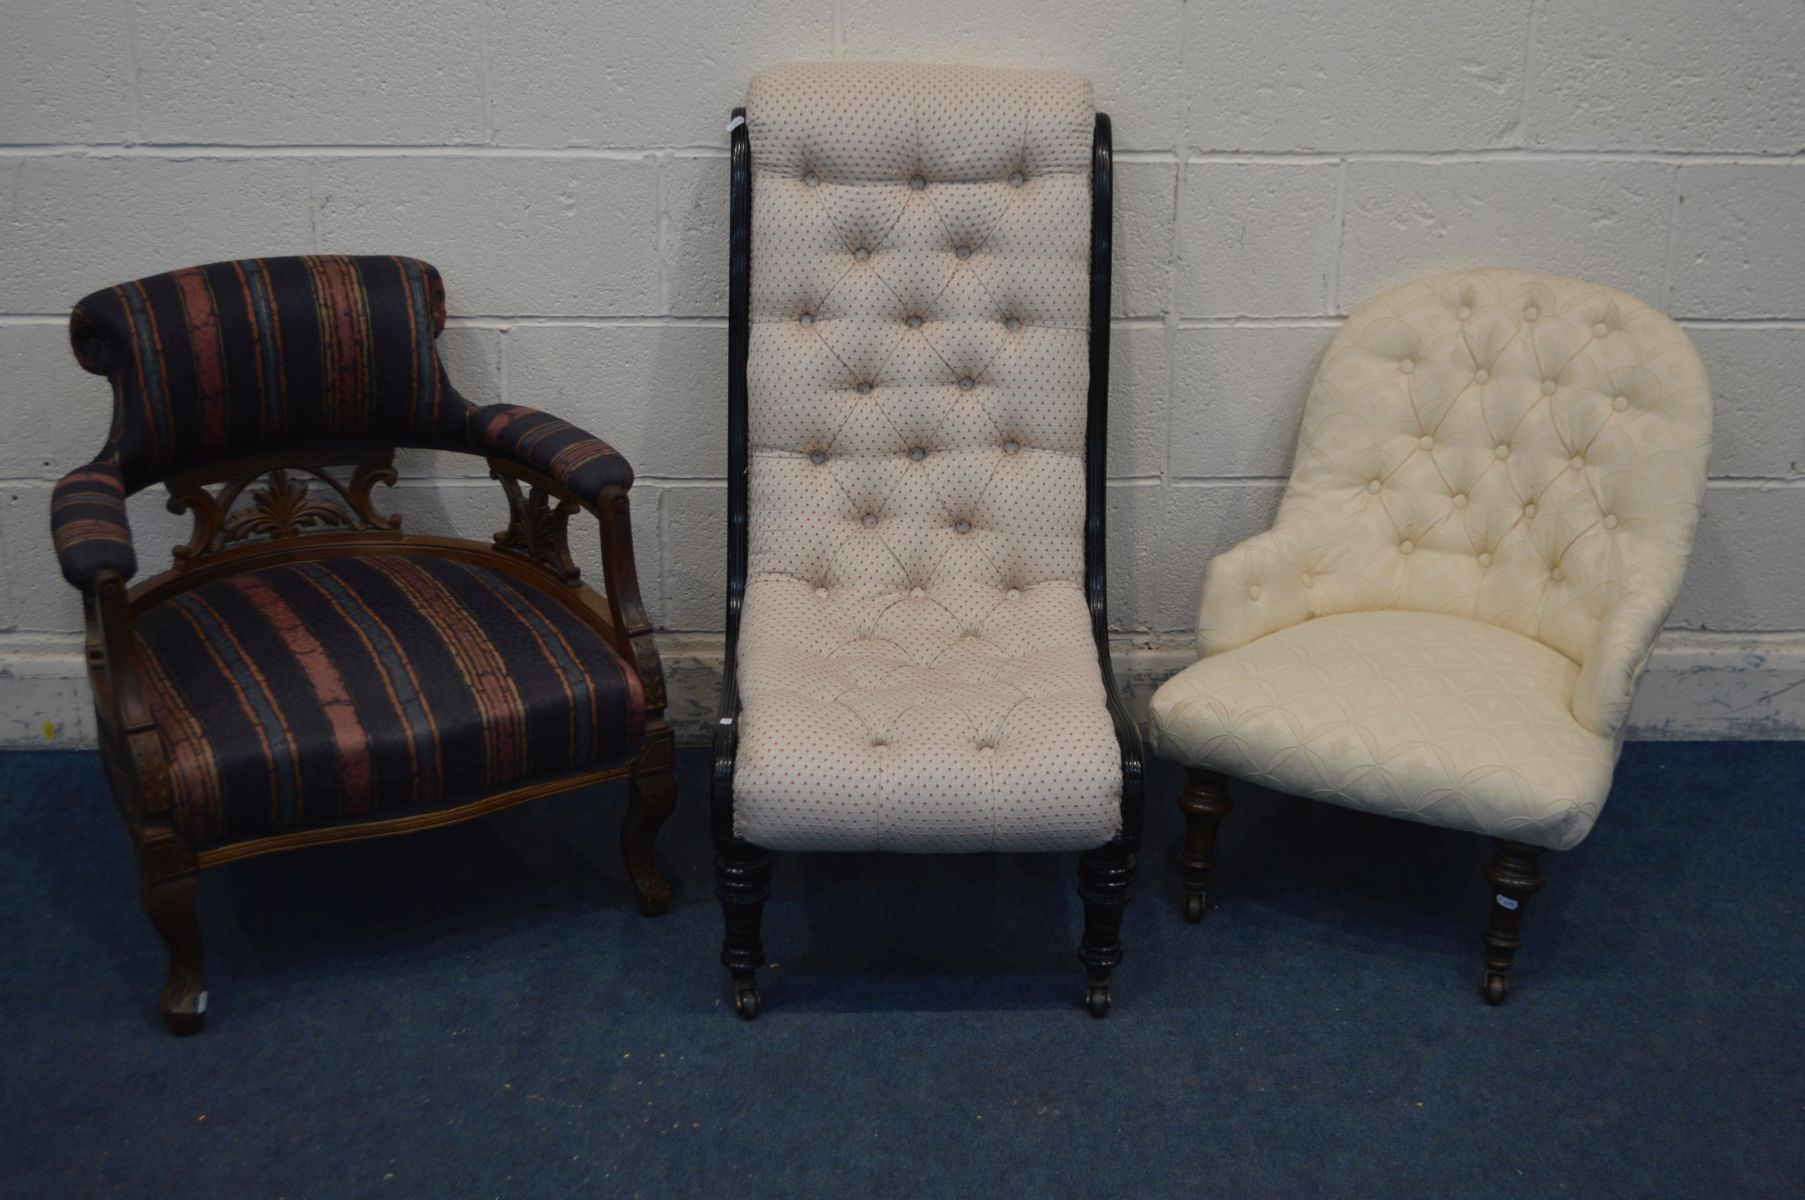 AN EDWARDIAN EBONISED SCROLLED CHAIR, along with an Edwardian mahogany tub chair and another